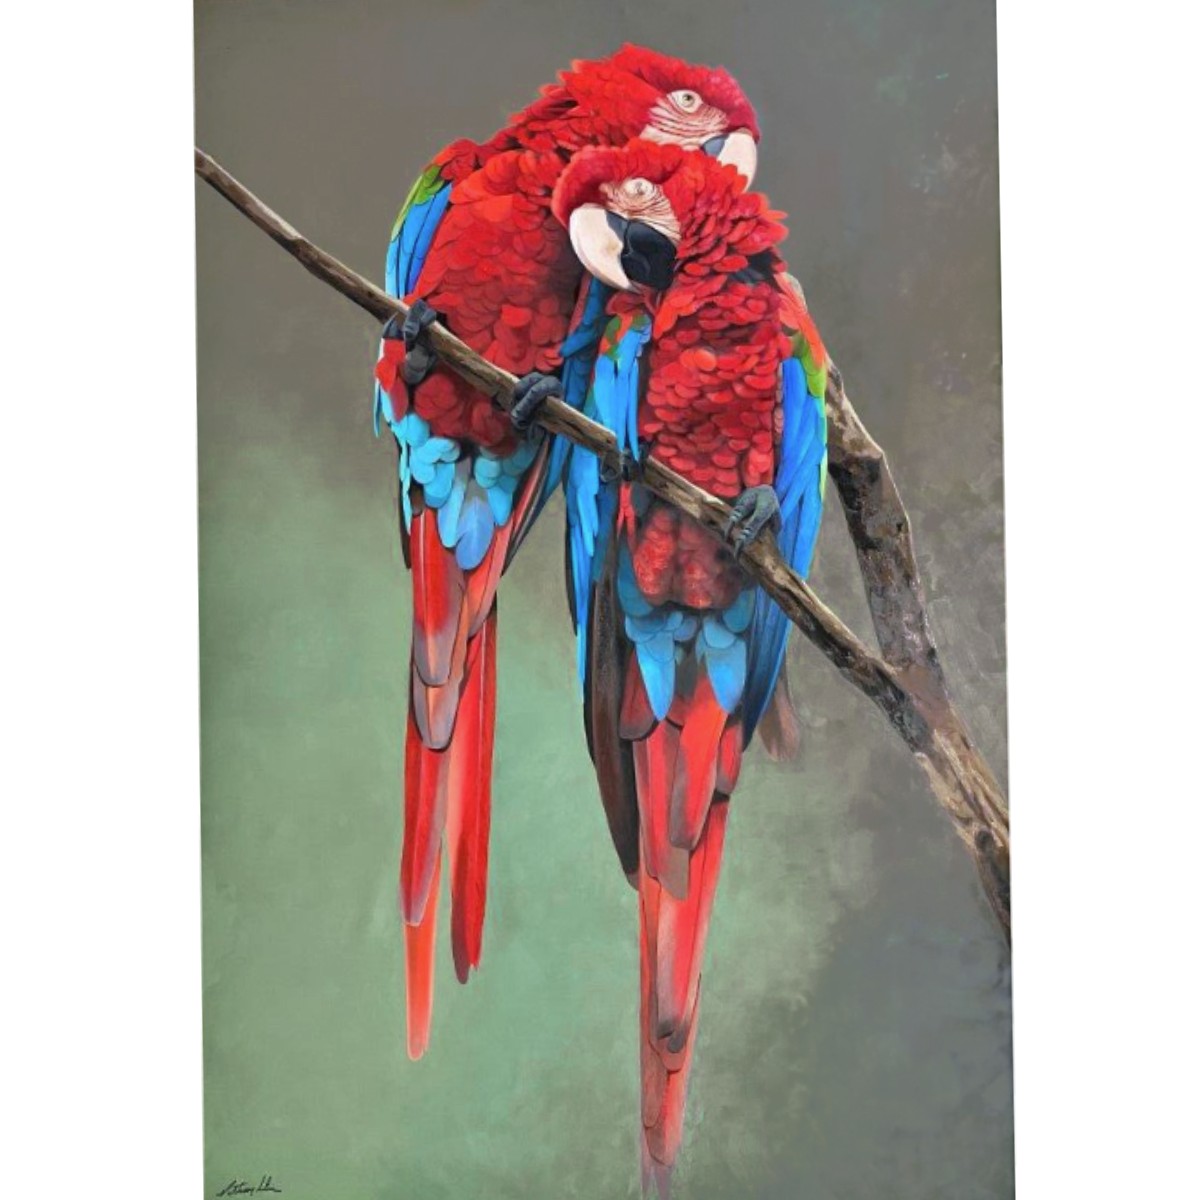 AFFECTION OF THE MACAW - PETTERSON SILVA - Galeries Bartoux